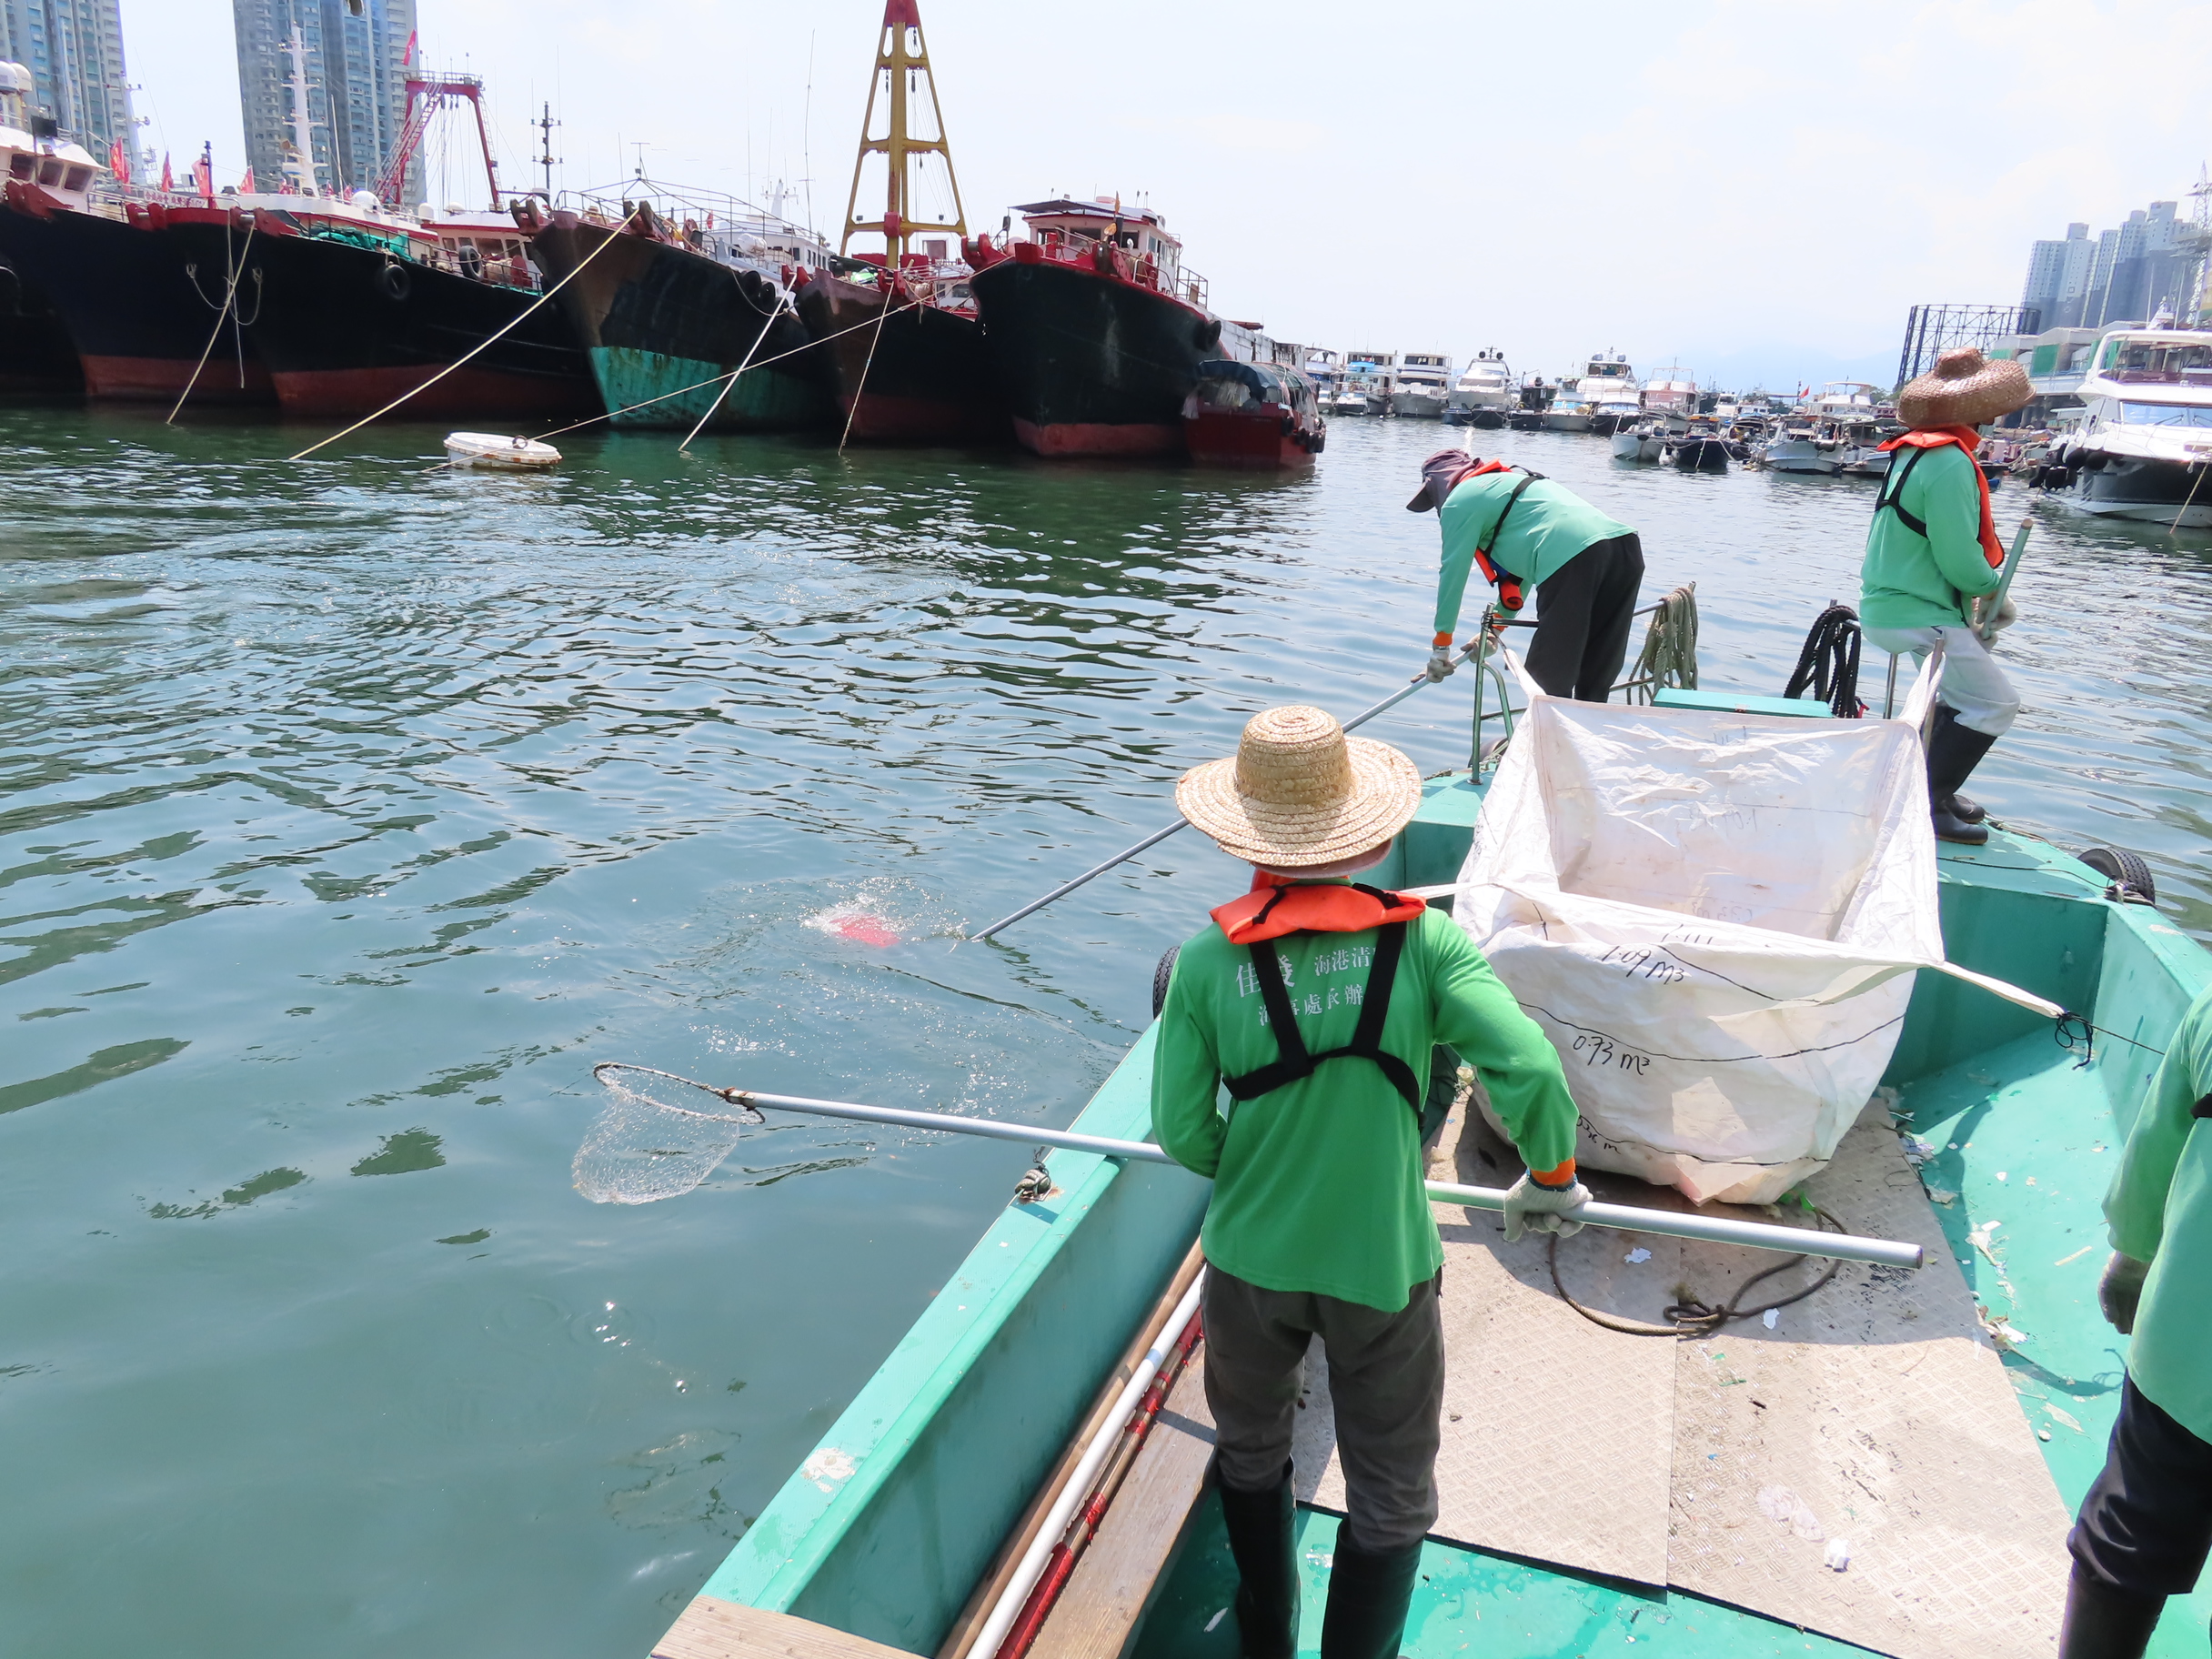 Participants in the Refuse Collection Vessels Demonstration will get an understanding of ocean clean-up operations.